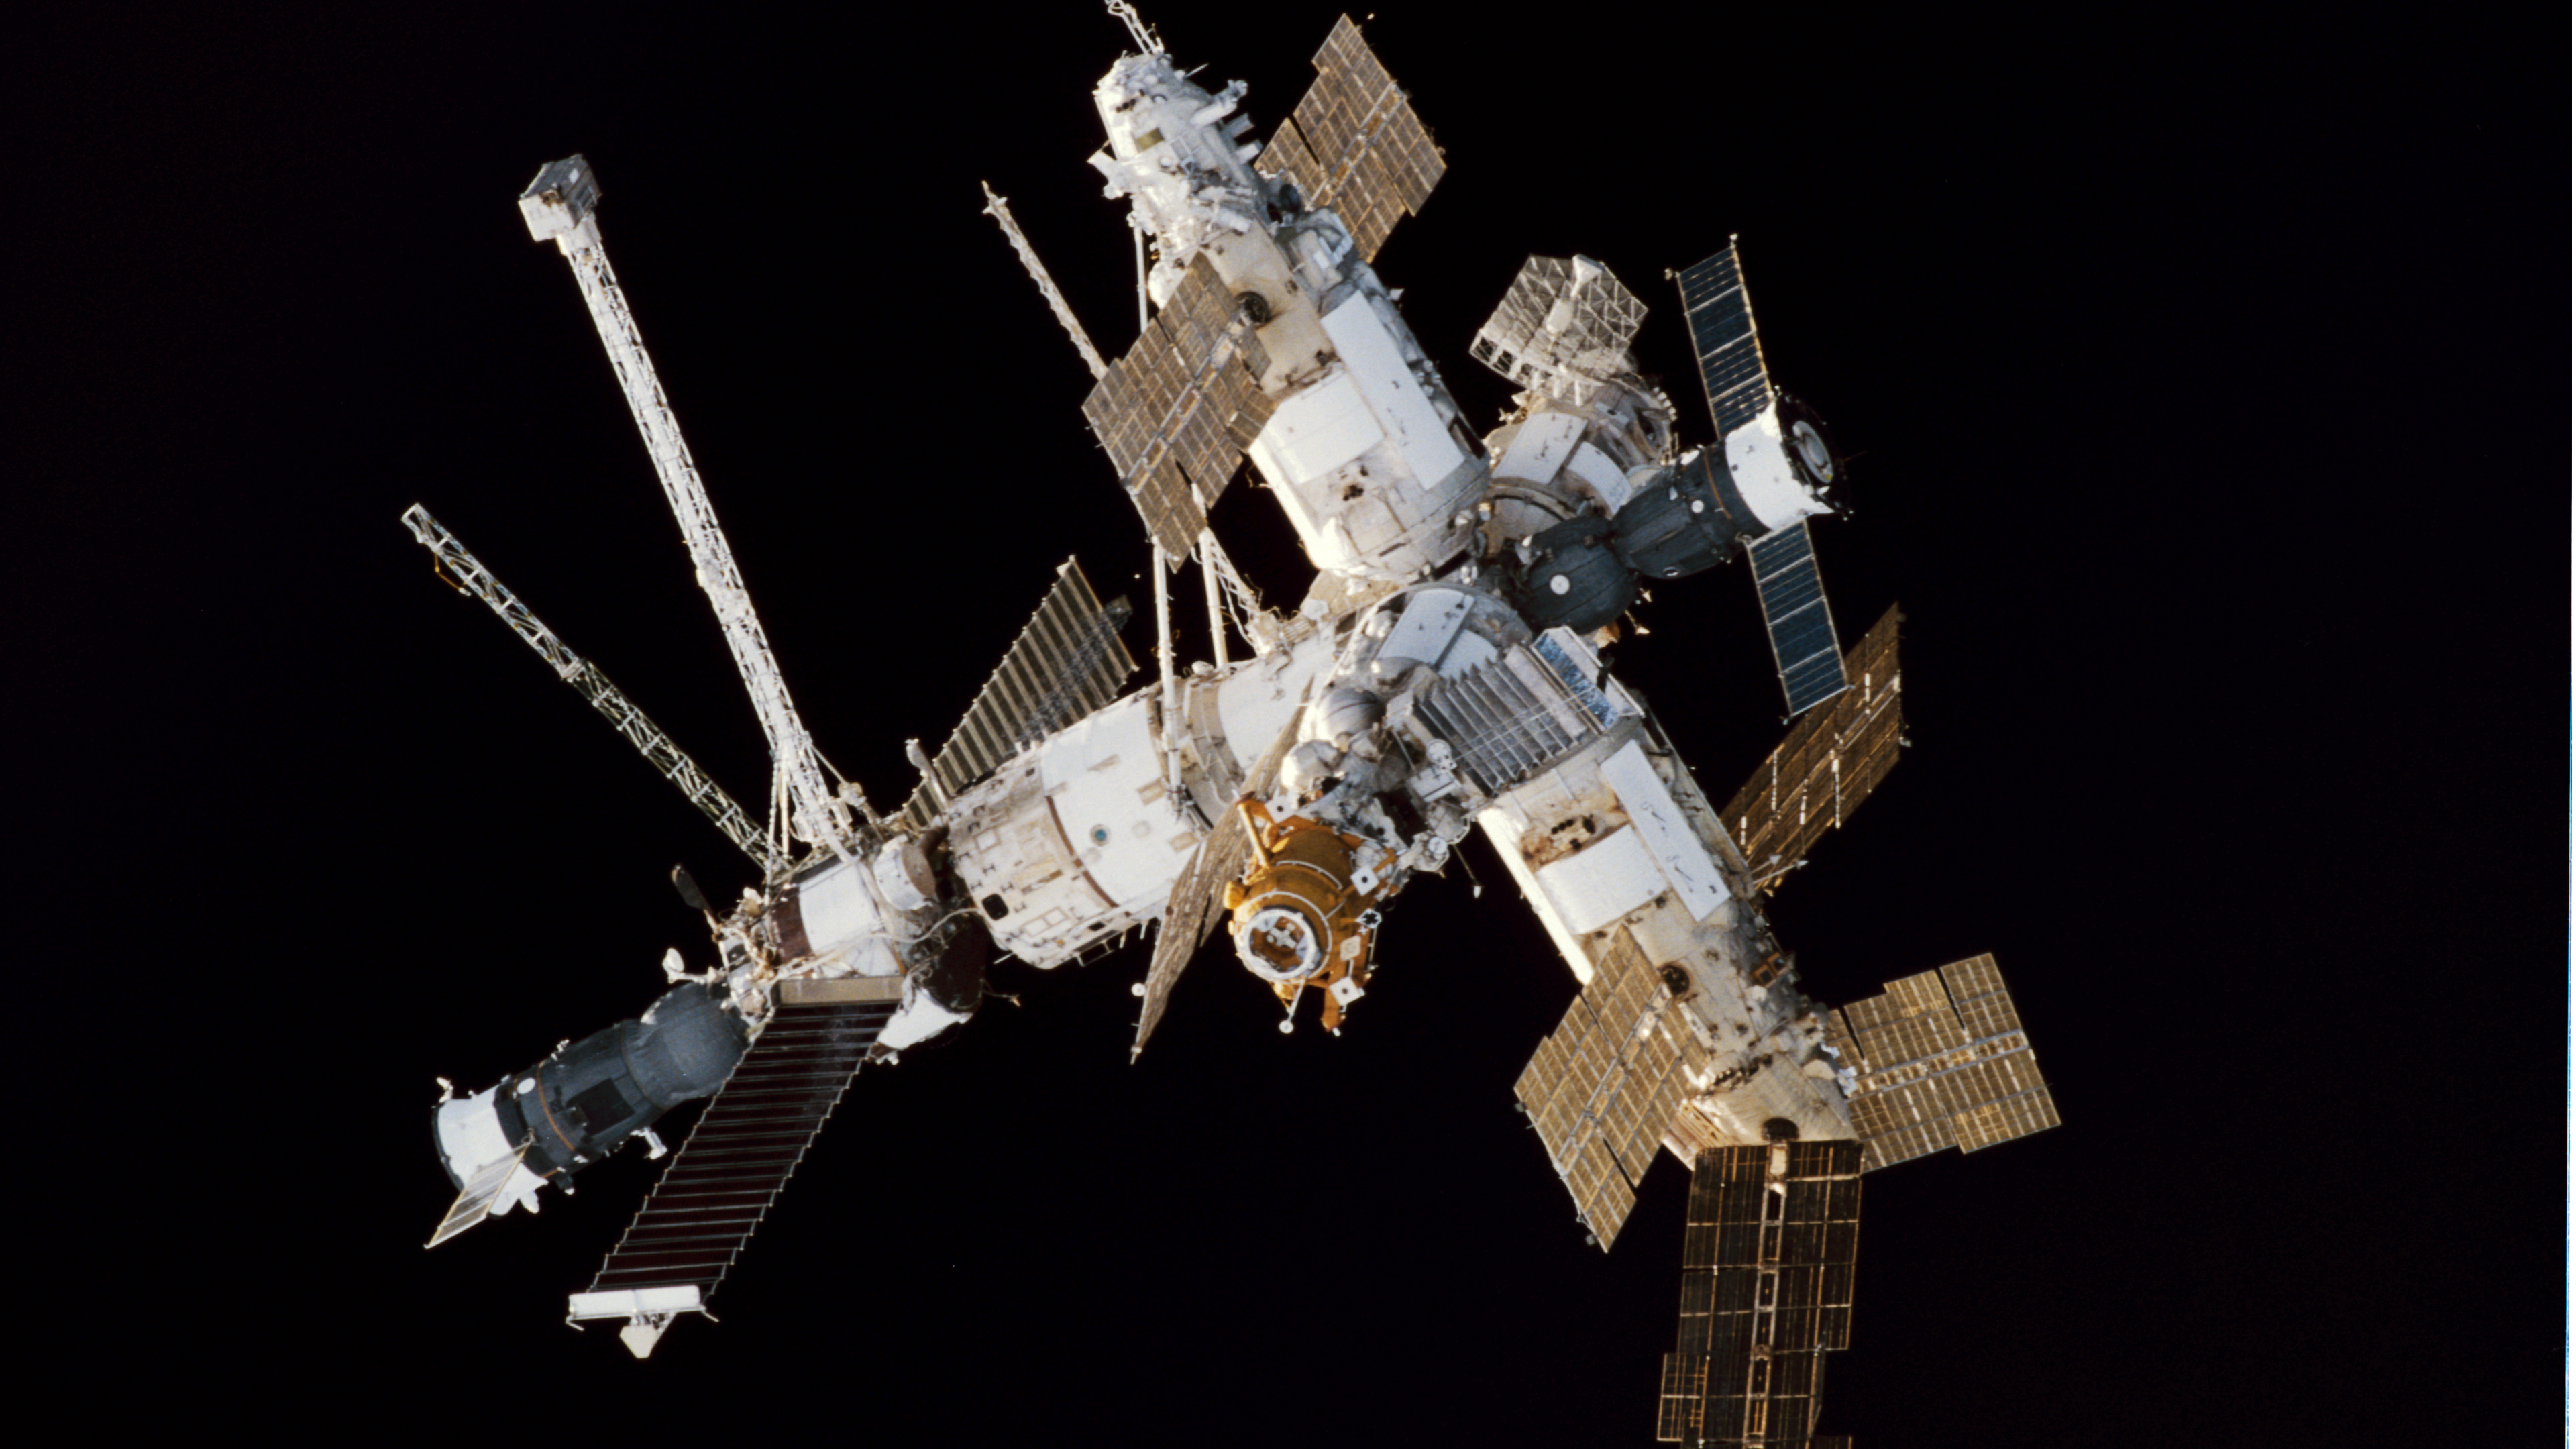 Space Space Station International Space Station 3840x2160